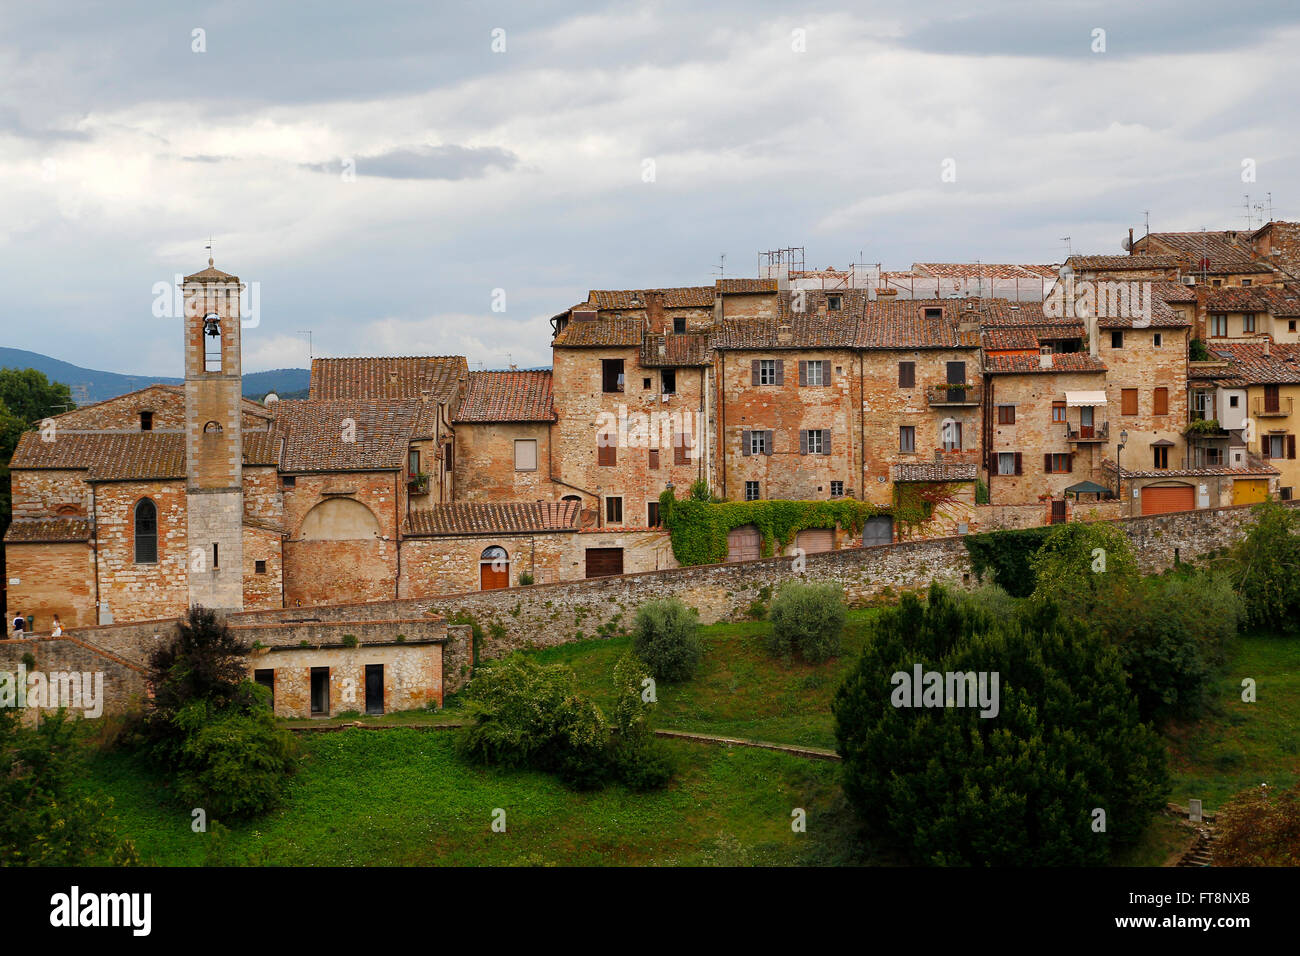 Colle di val d'Elsa, a beautiful medieval village in the Tuscany, Italy Stock Photo